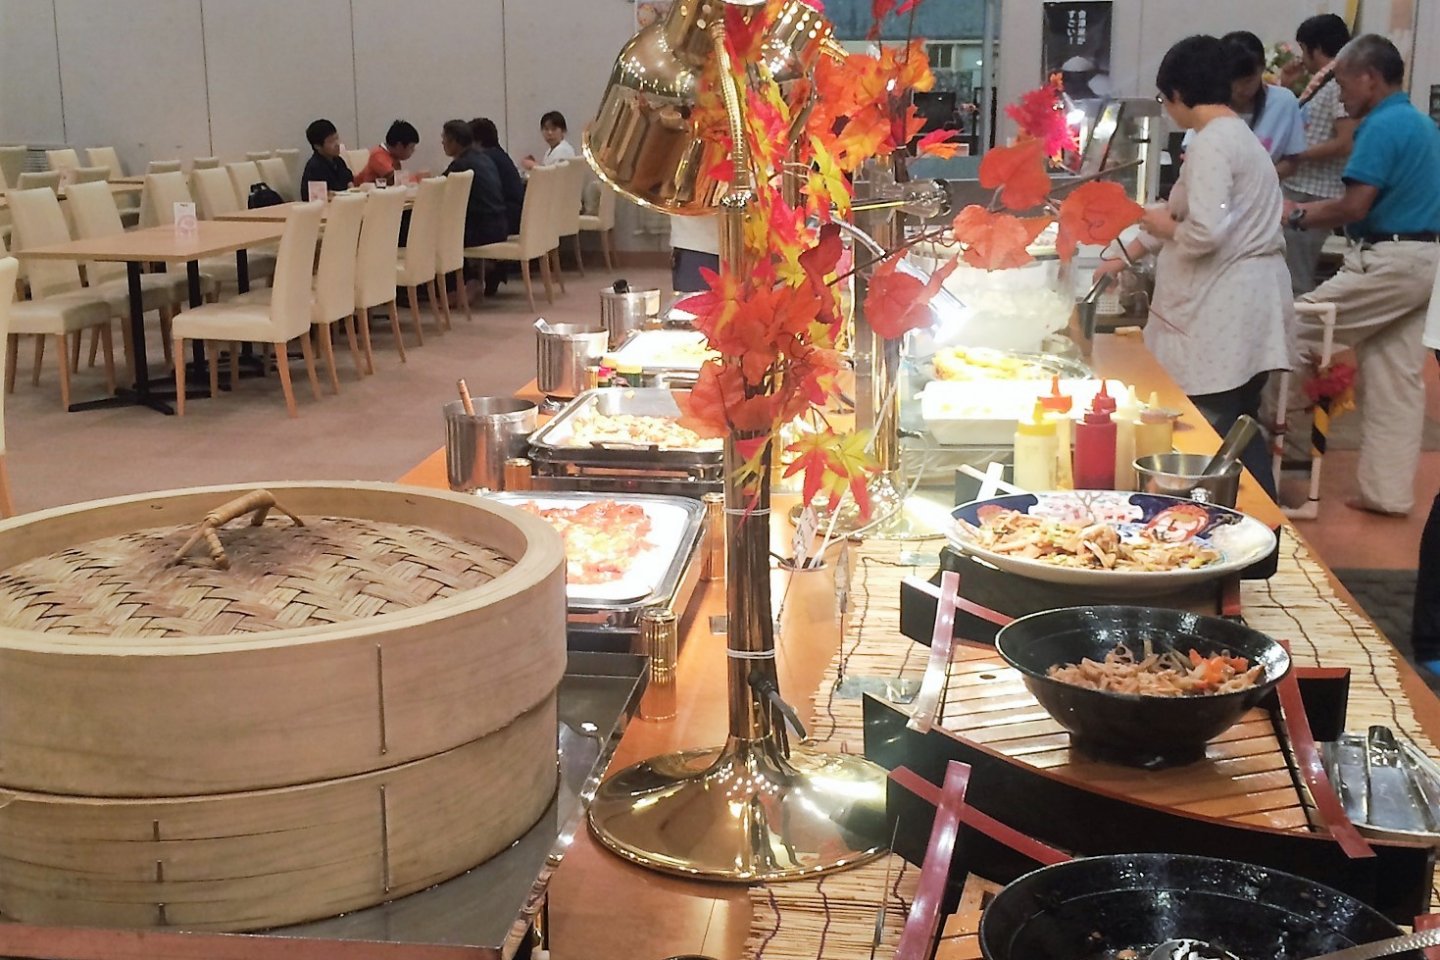 The fall display of food at one of the three tables of food.